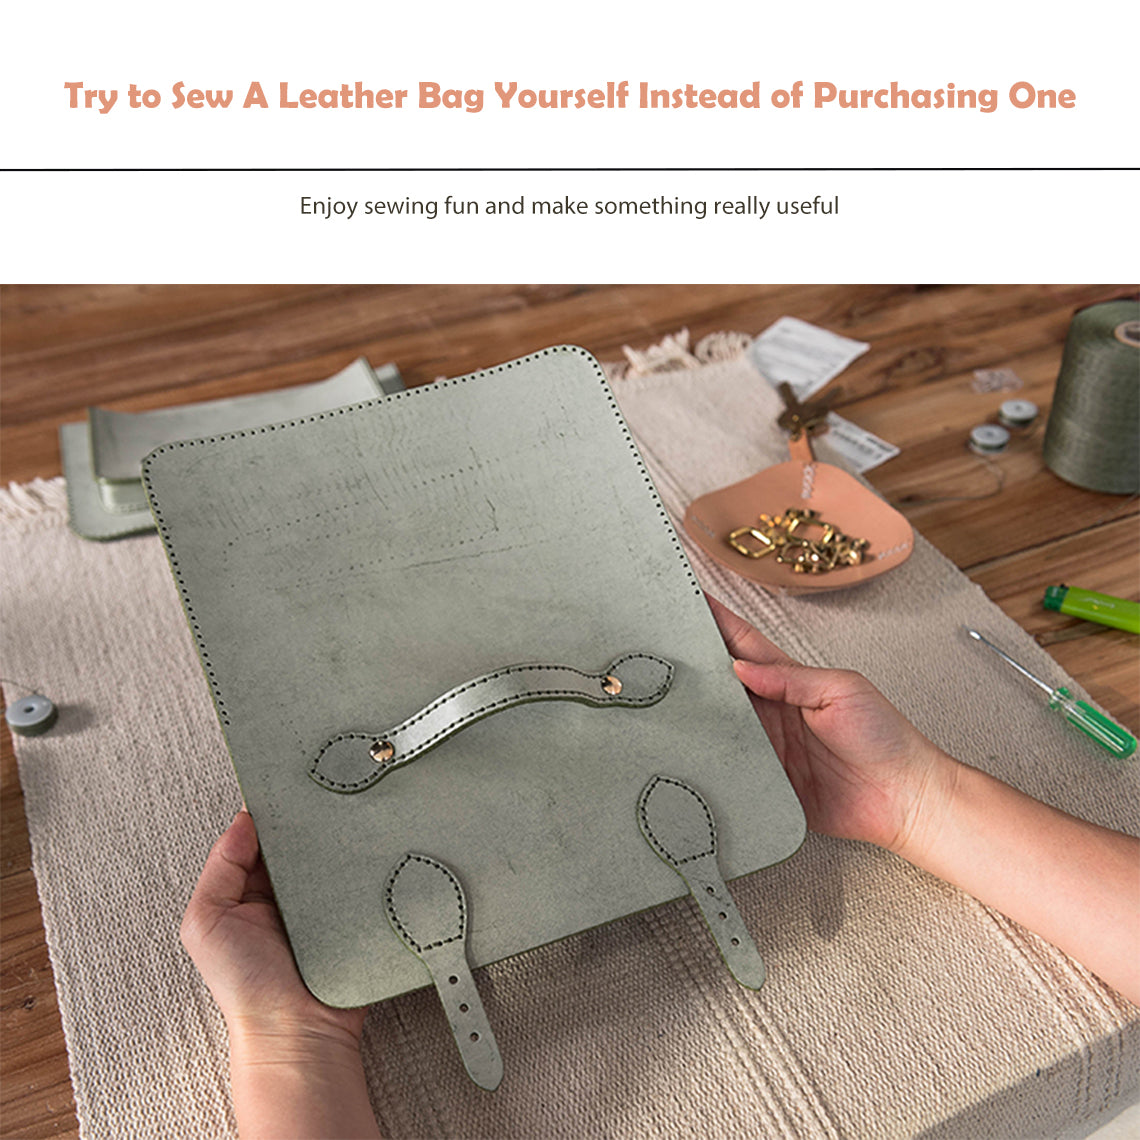 Leather Bag Making Kits | Sewing Leather Bags - POPSEWING®